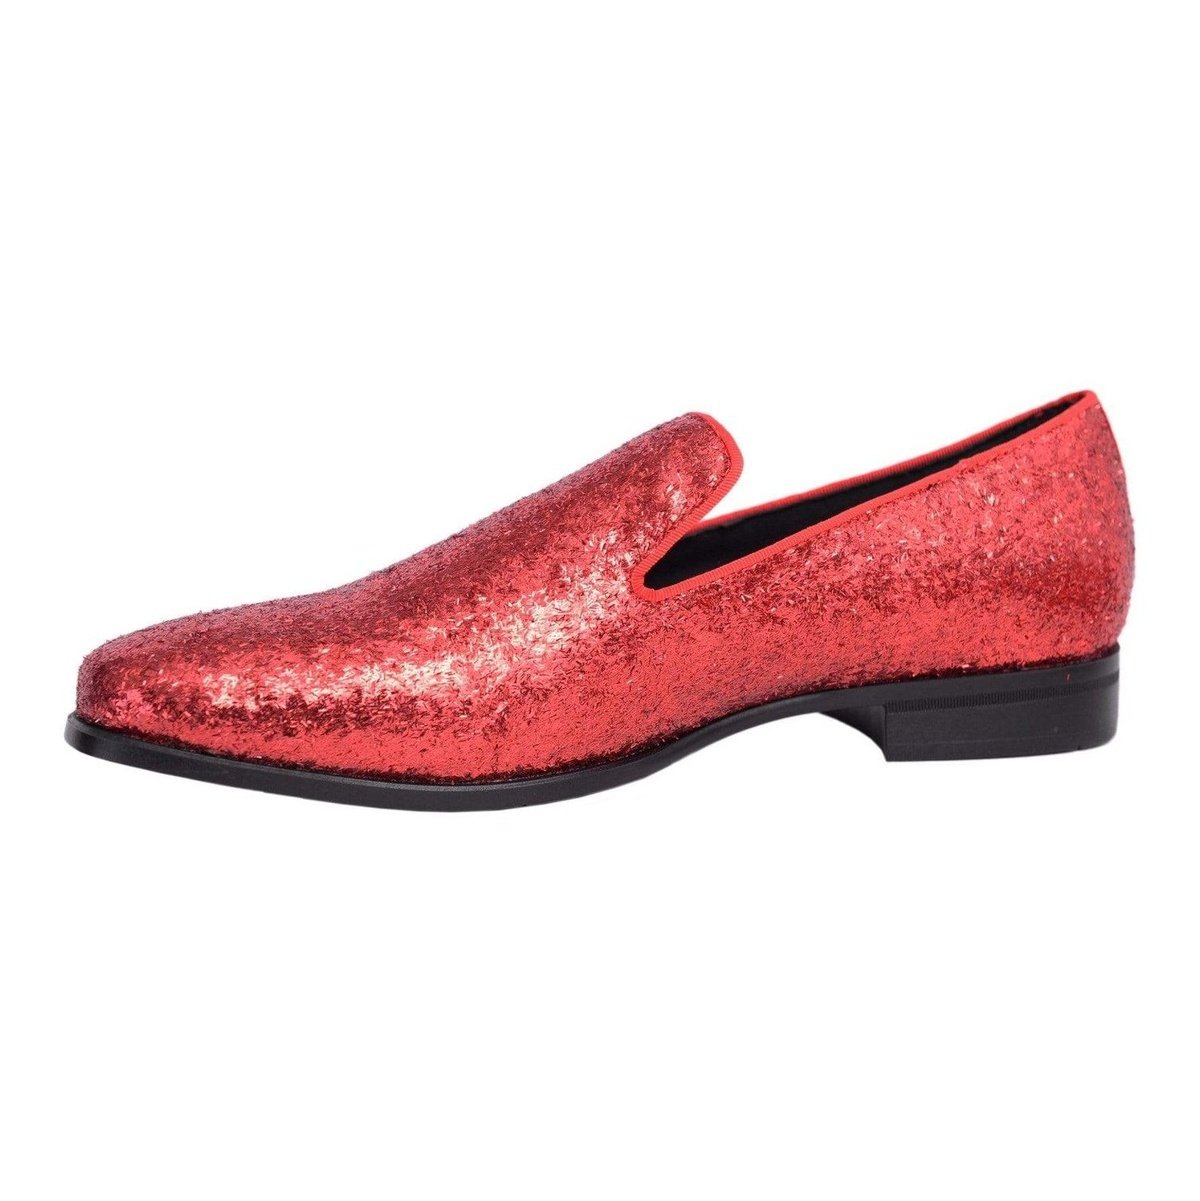 Stacy Adams Swank Textured Red Sparkle Slip-on Dress Shoes - The Suit Depot